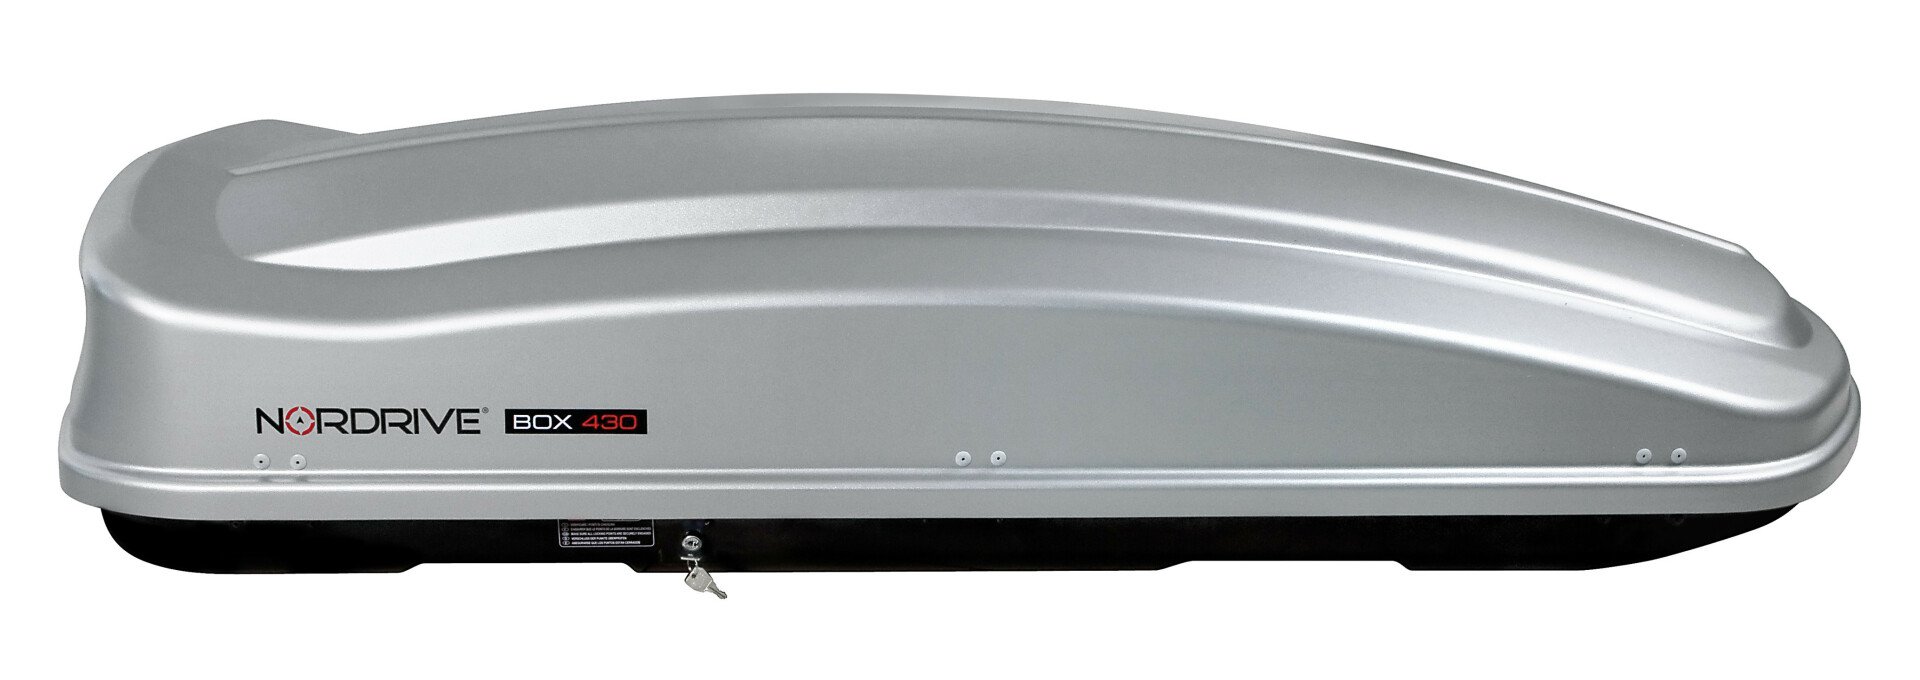 D-Box 430, ABS roof box, 430 ltrs - Embossed Grey thumb